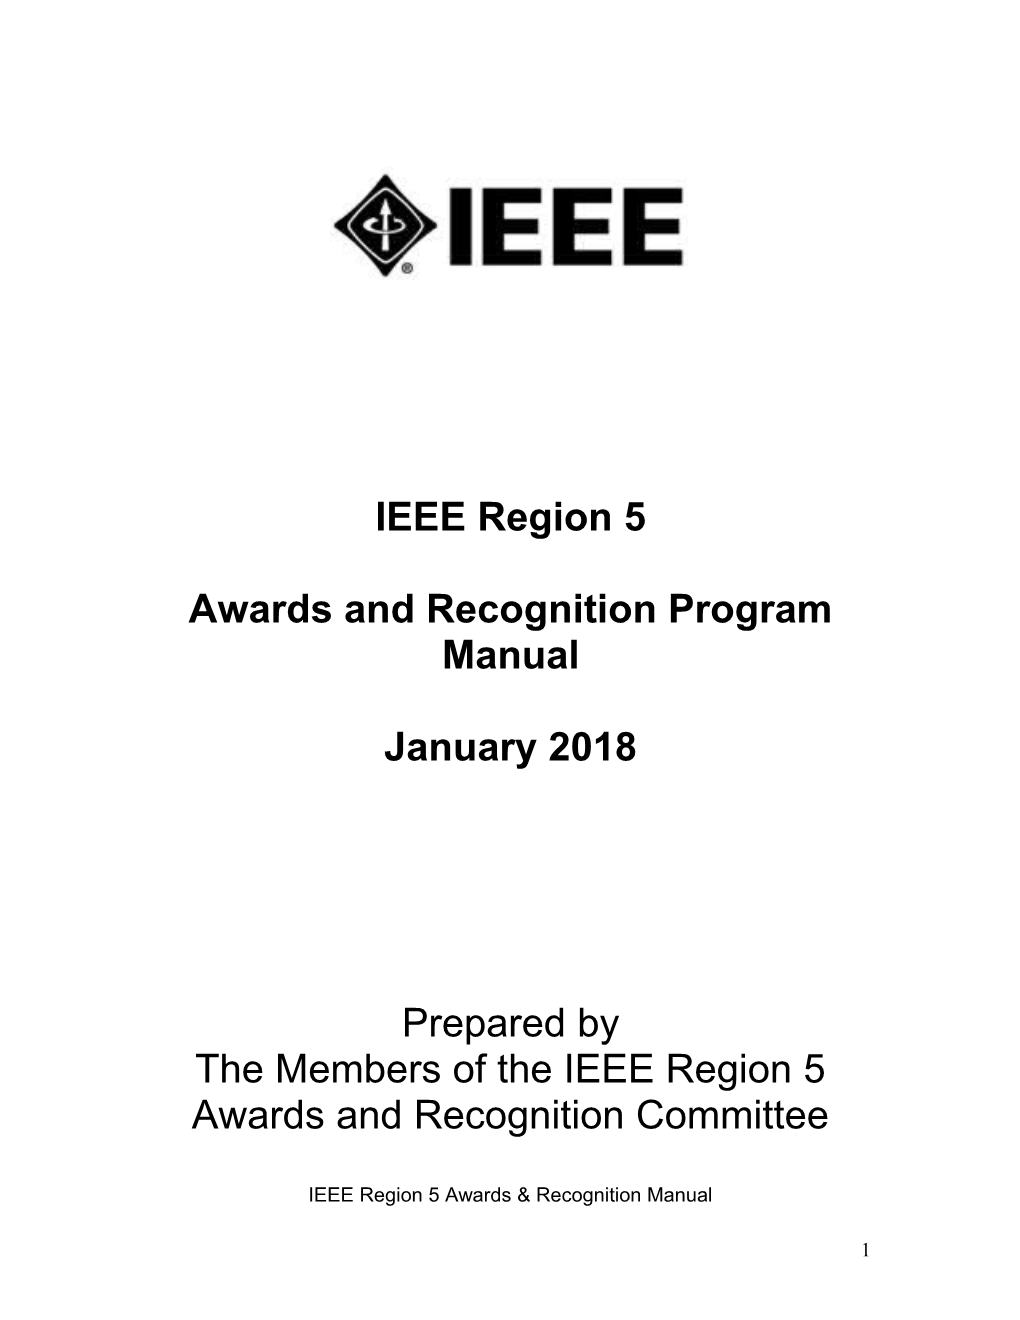 Awards and Recognition Program Manual